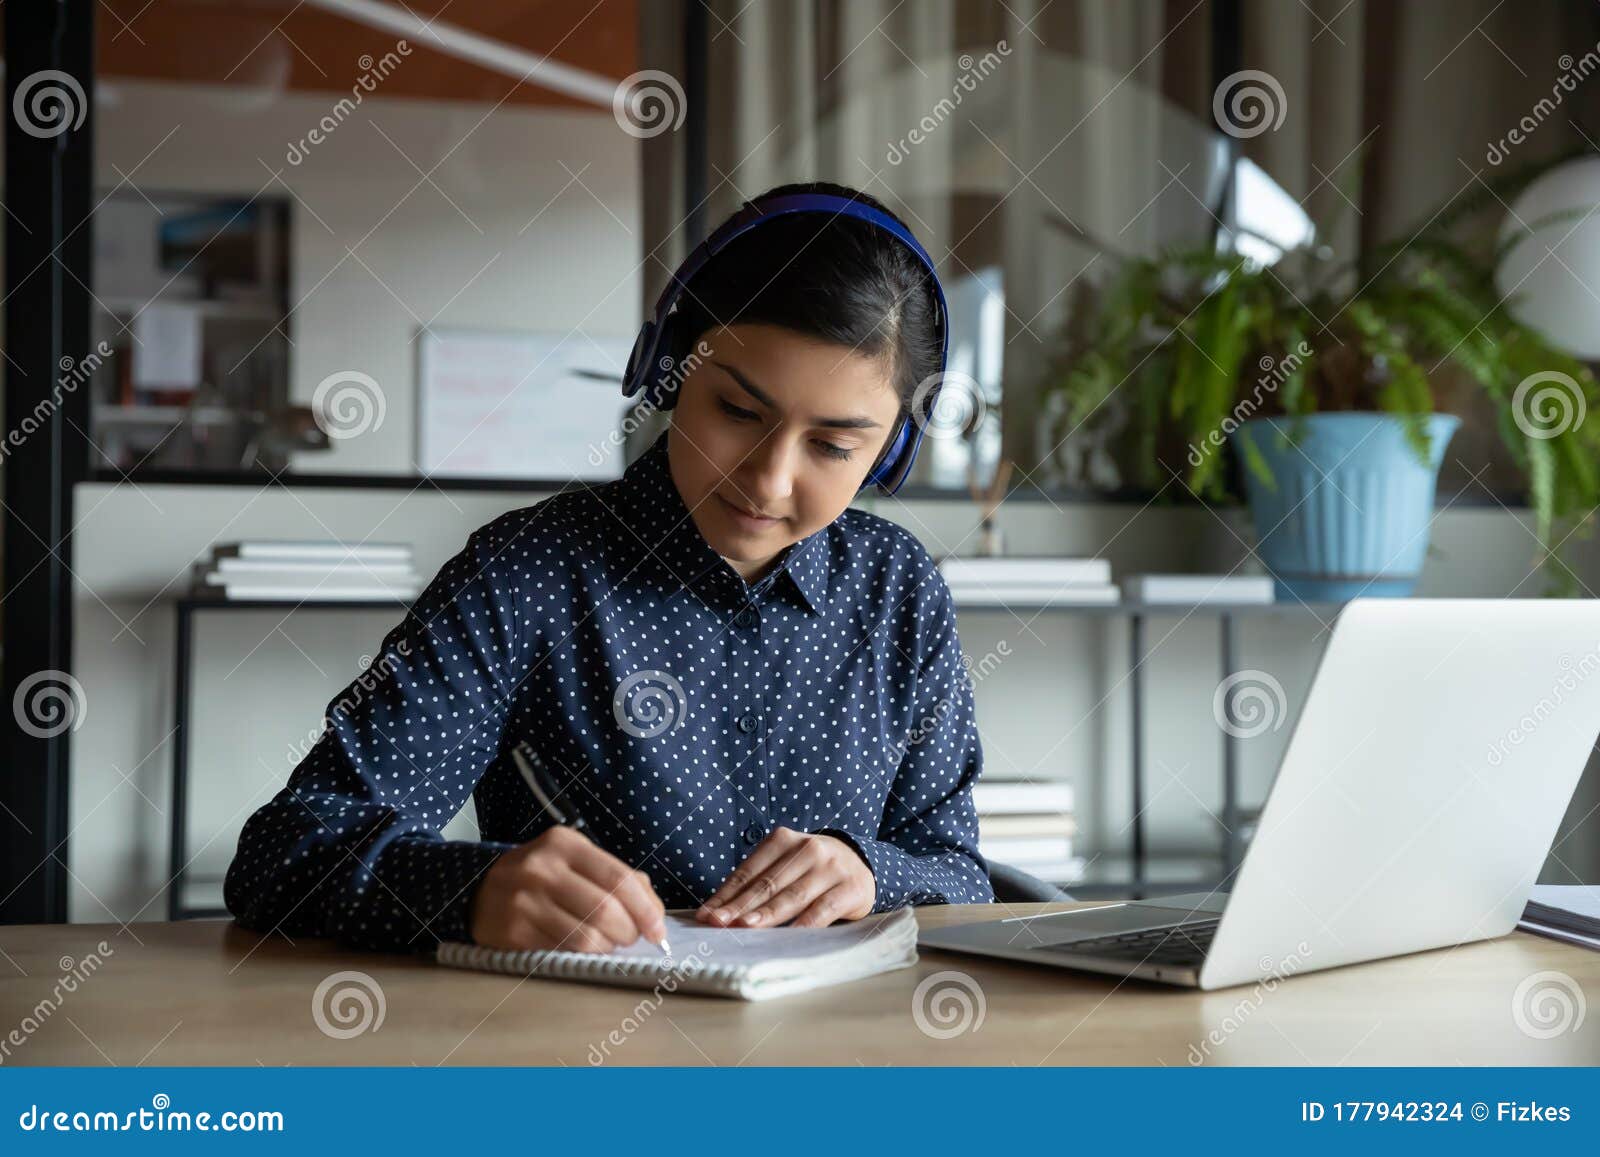 concentrated female student studying remotely on online courses.